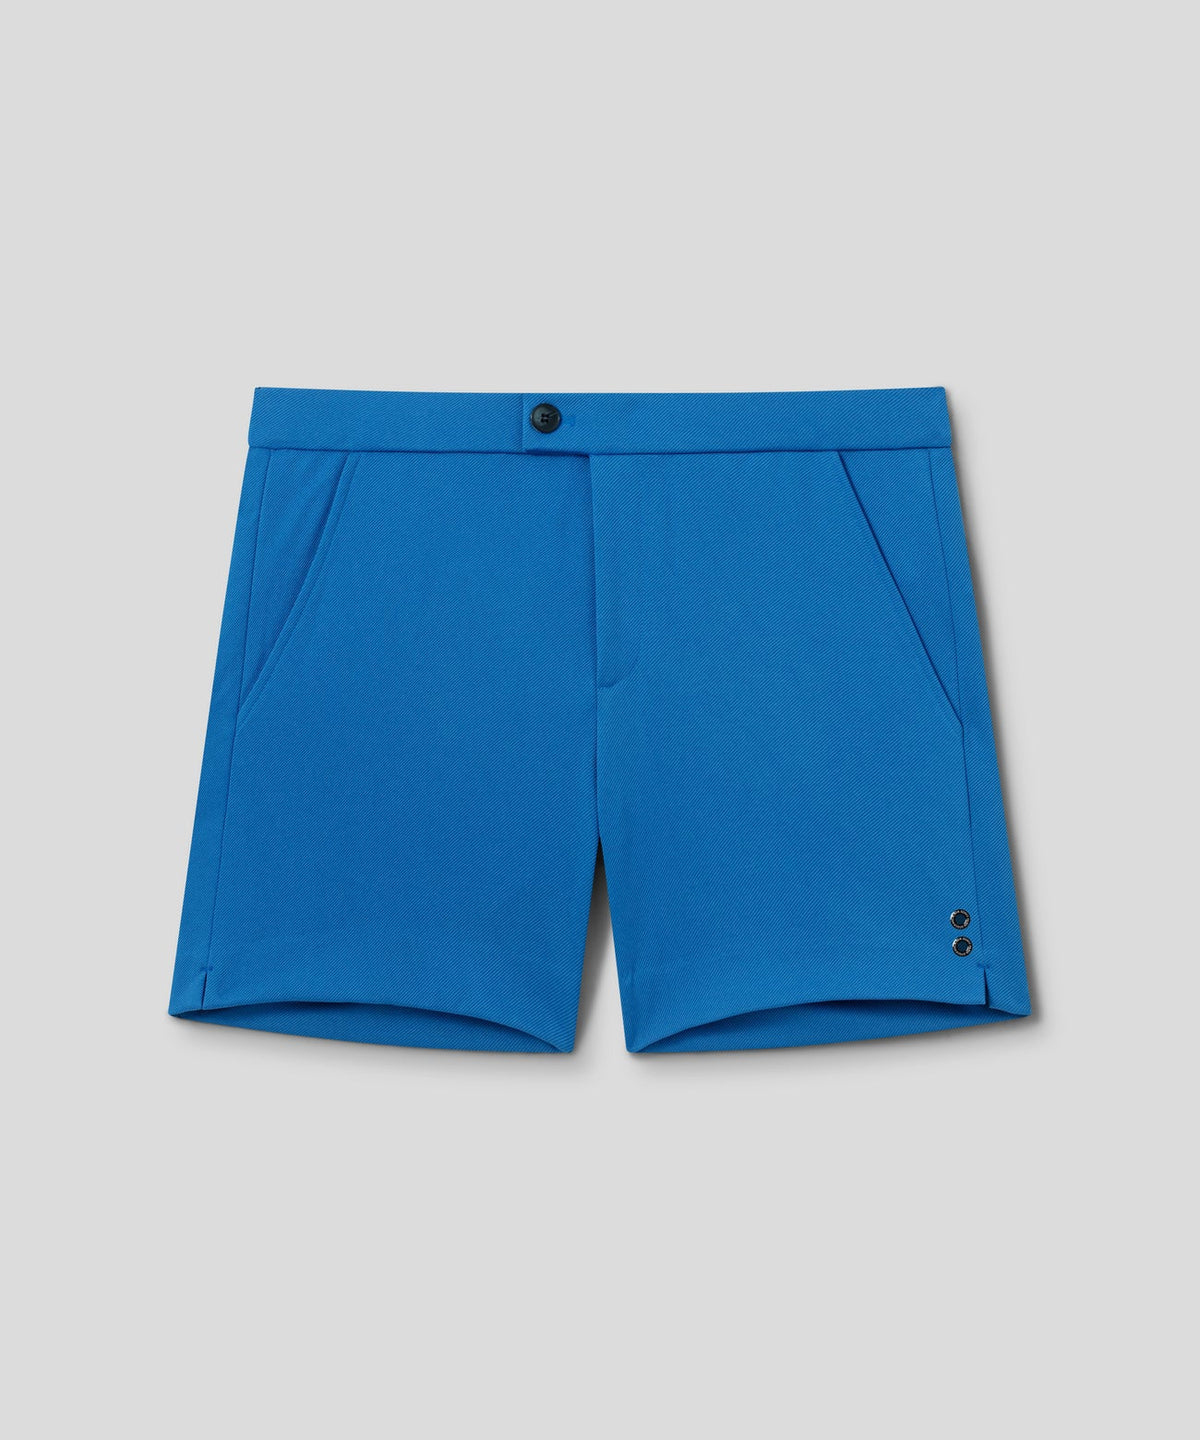 Tennis Shorts: French Blue